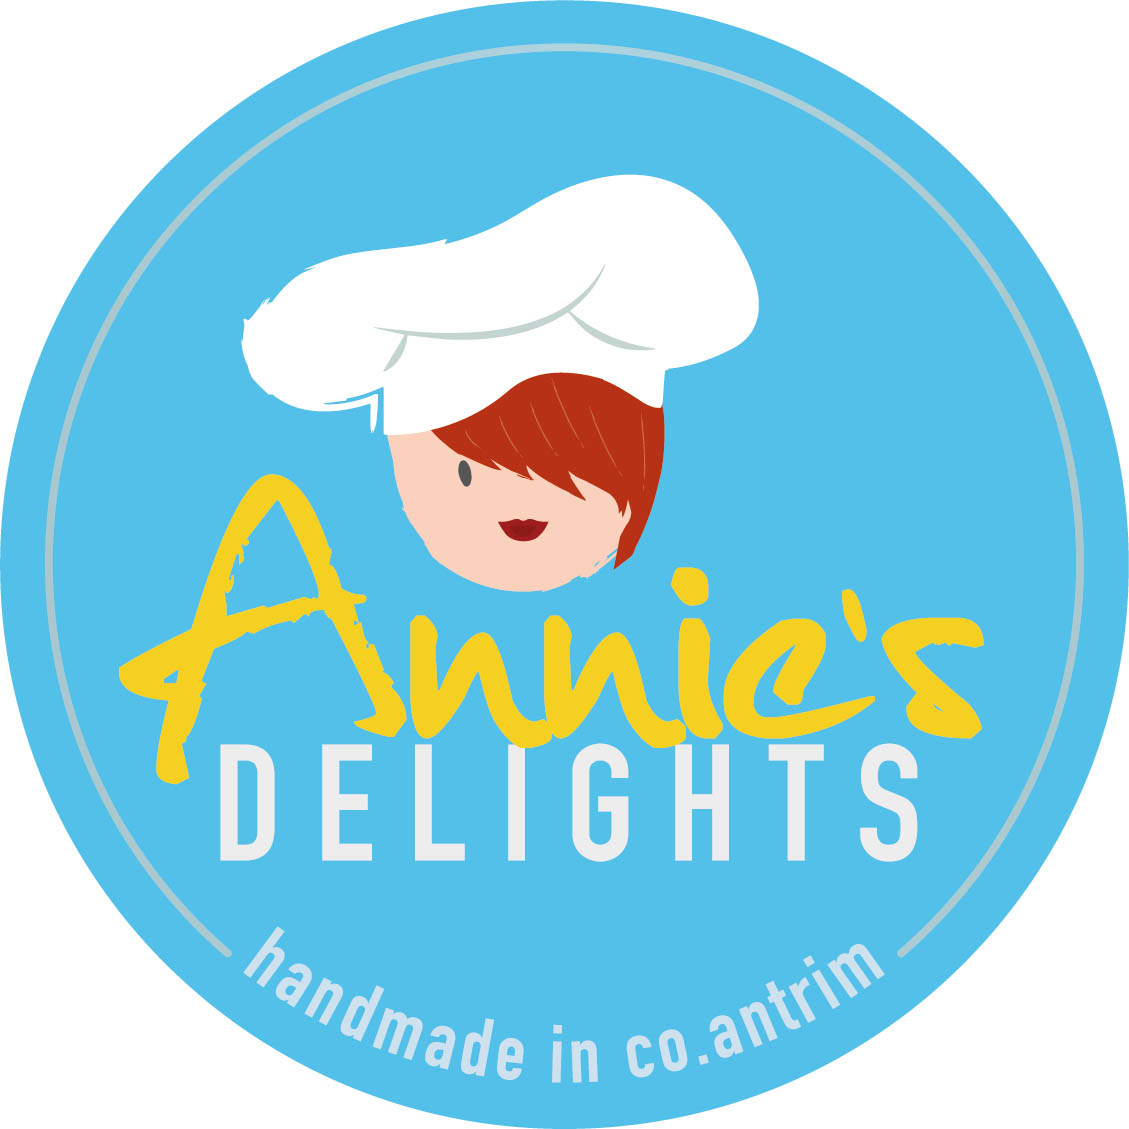 Annie's Delights